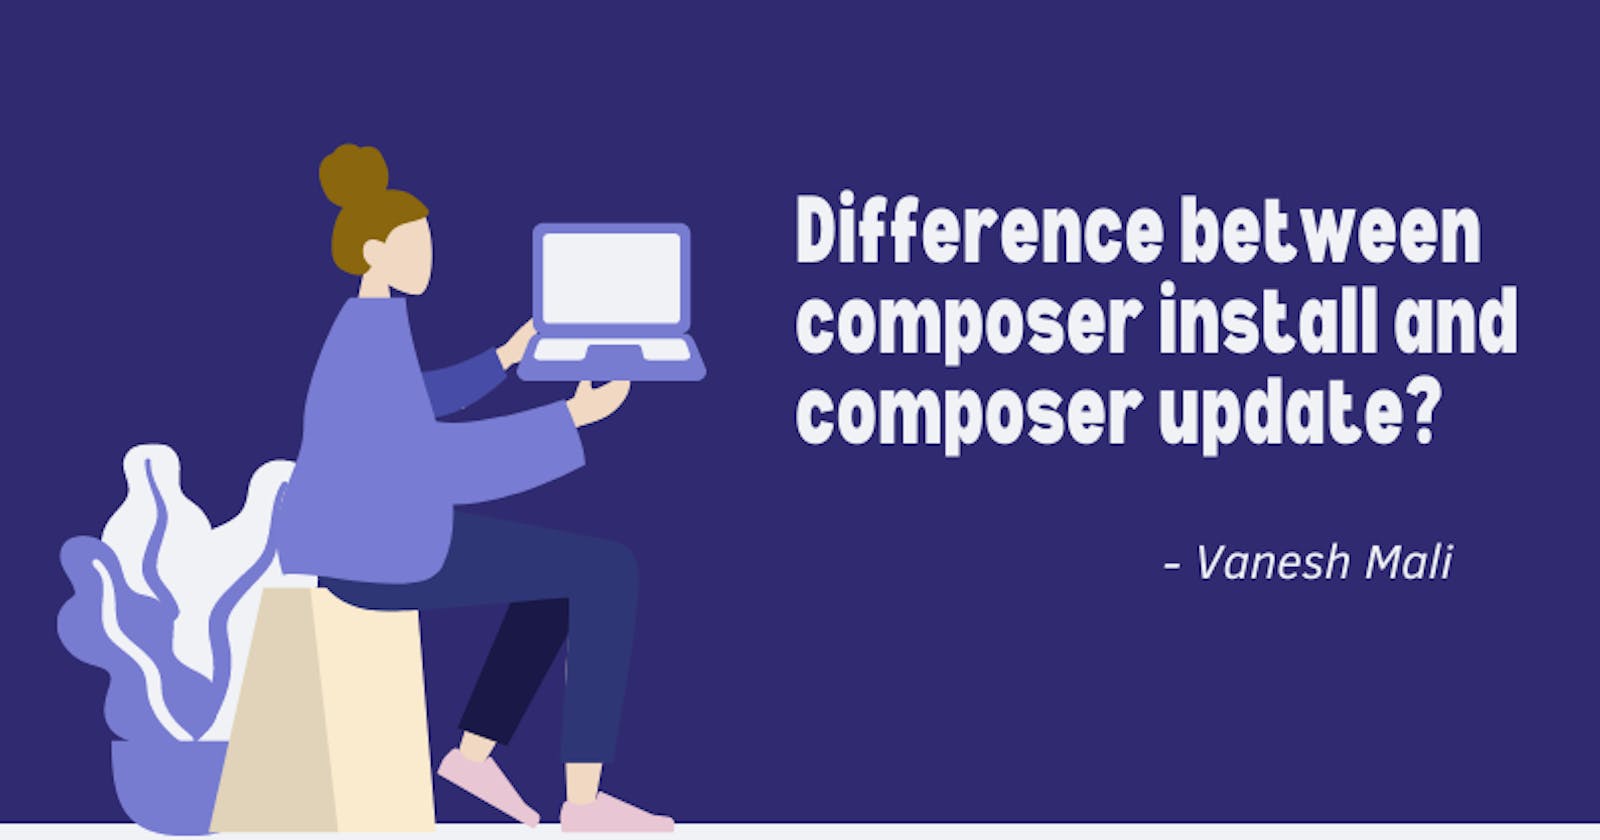 Difference between composer install and composer update?